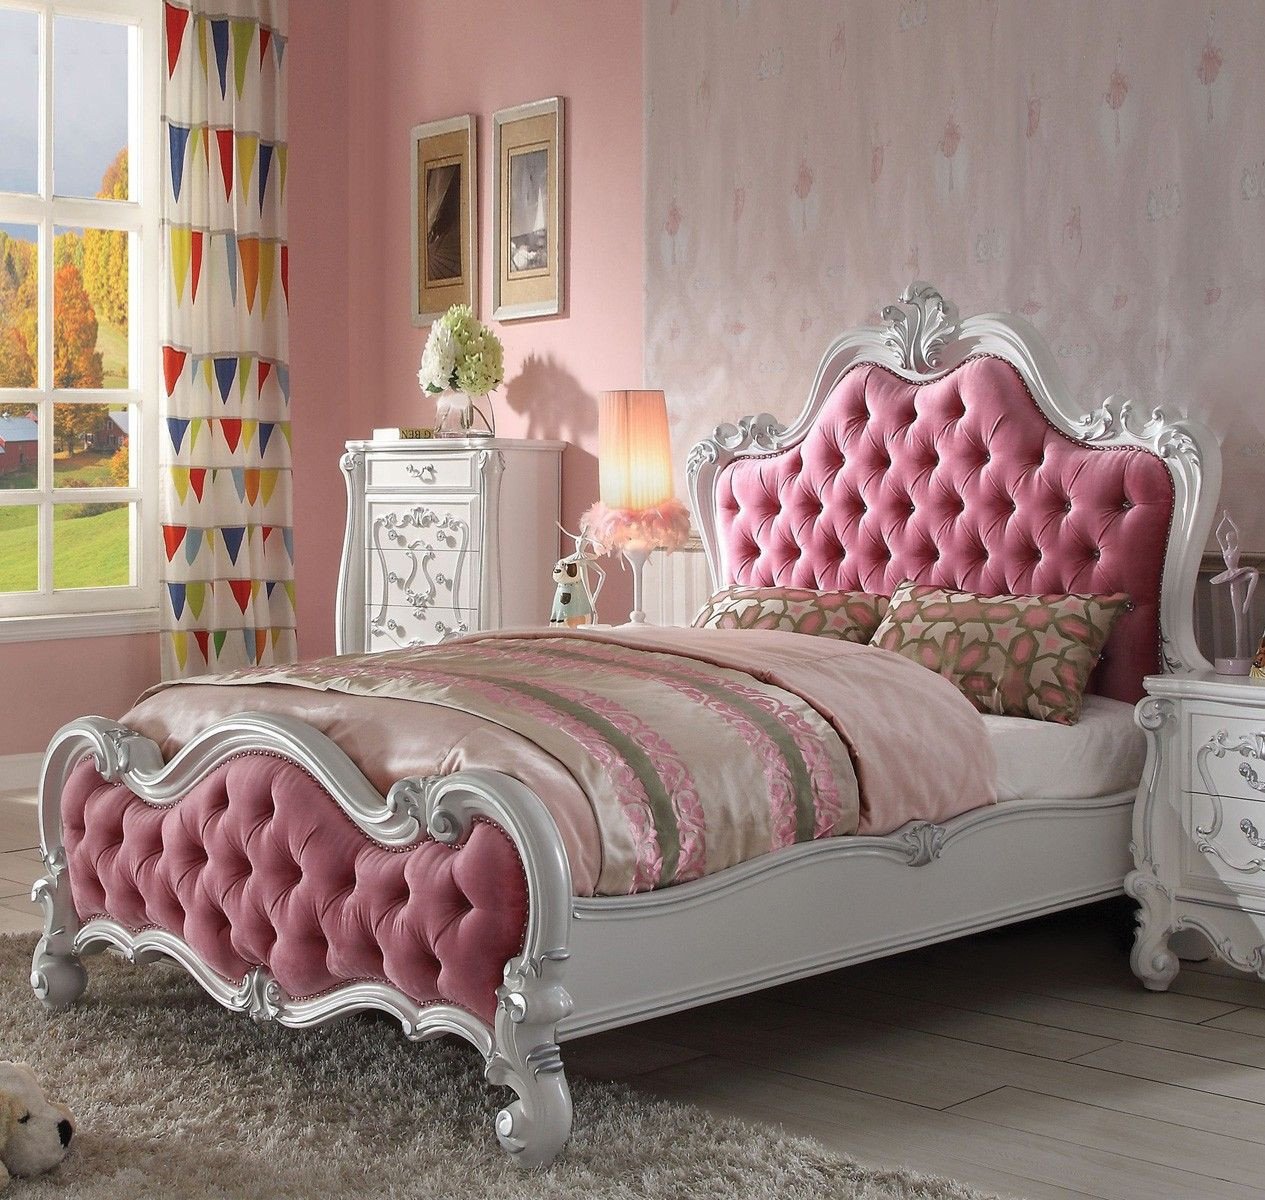 Girls White Bedroom Set Luxury Acme Versailles Panel Bedroom Set In Pink and Antique White